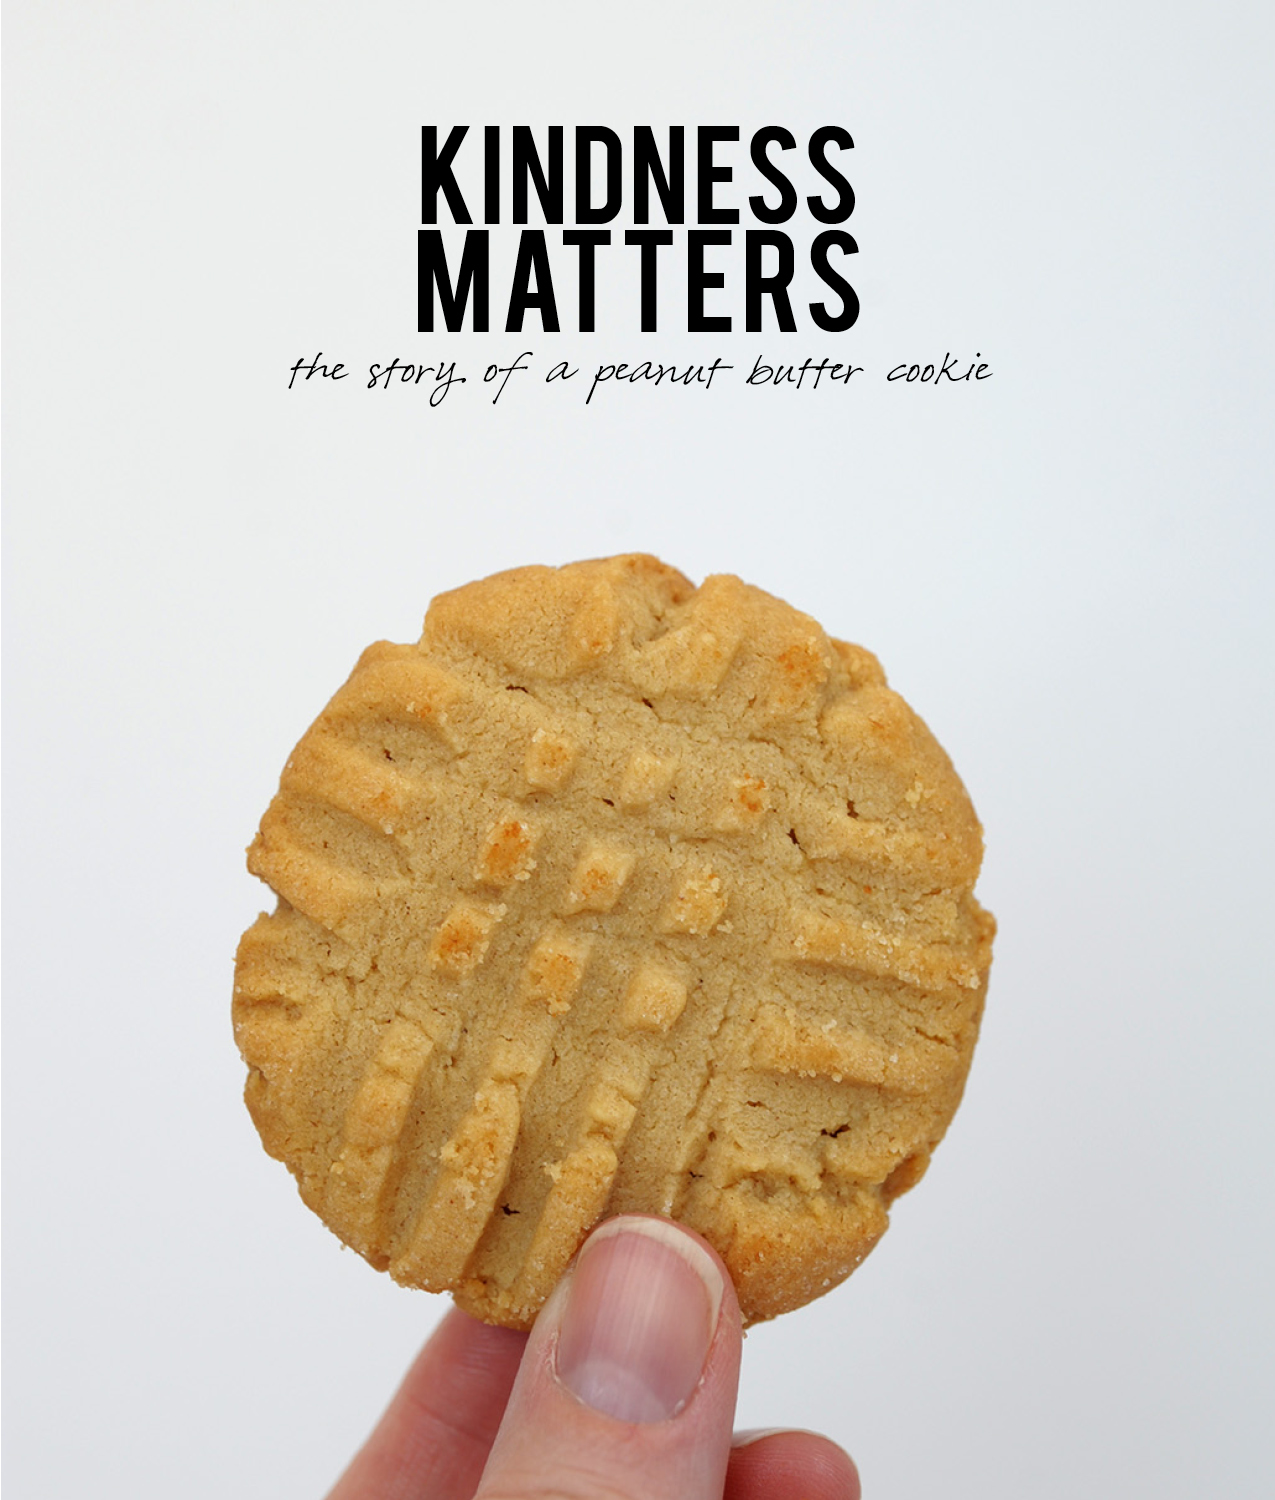 Kindness Matters – the story of a peanut butter cookie